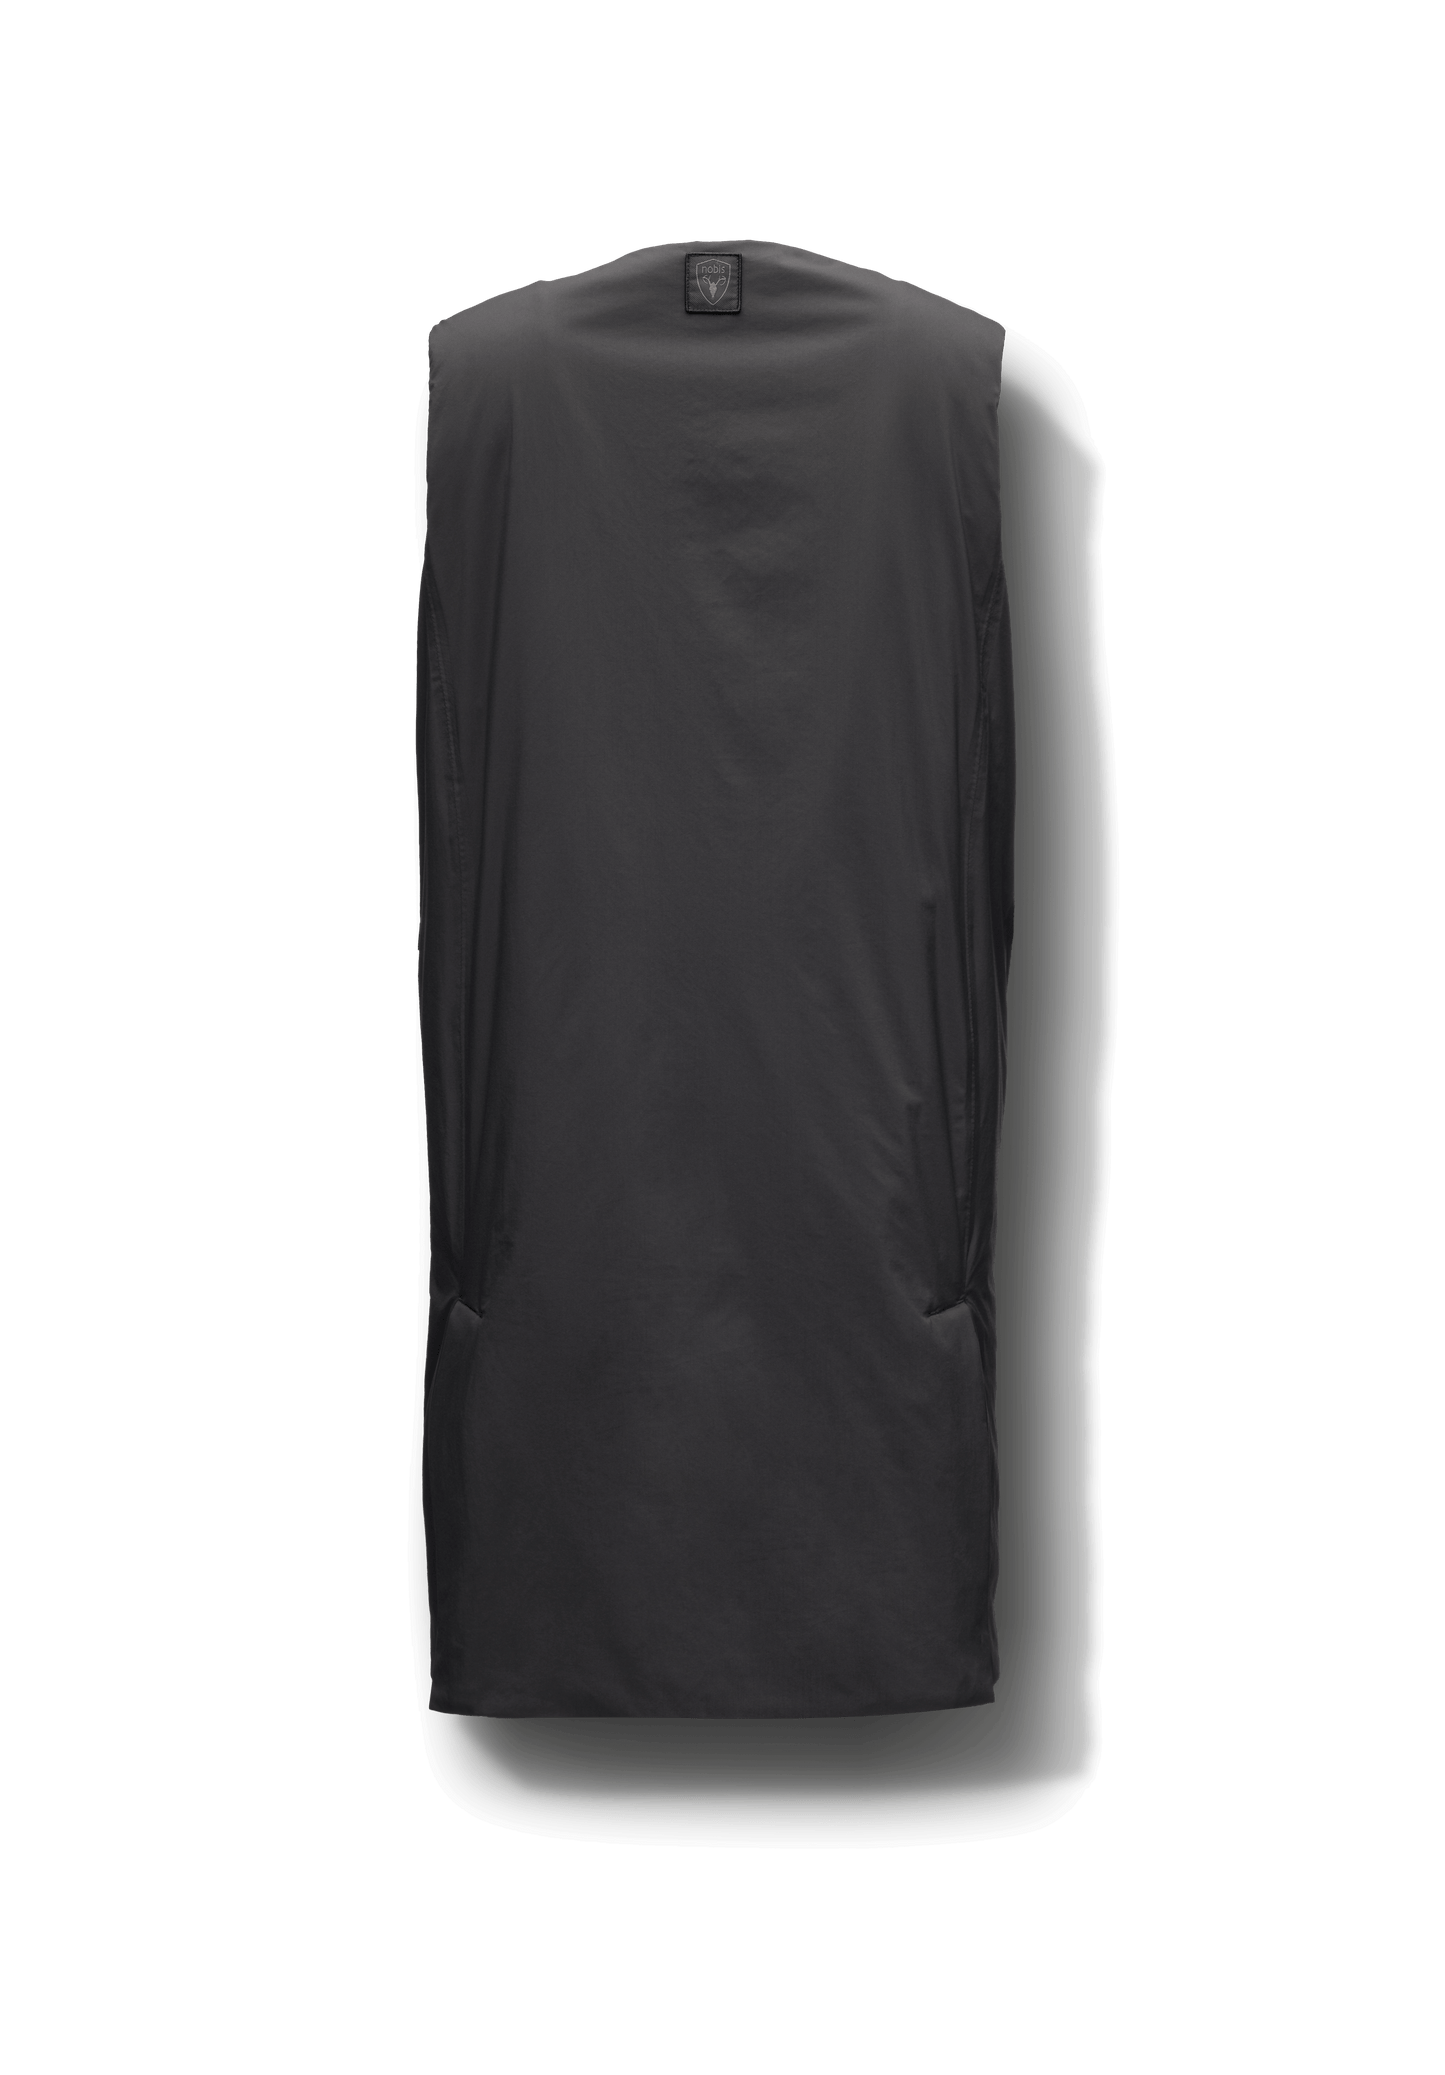 Brexton Women's Tailored Long Mid Layer Vest in knee length, centre front wind flap, flap closure waist pocket with additional side entry storage, single vent on back bottom hem, in Black